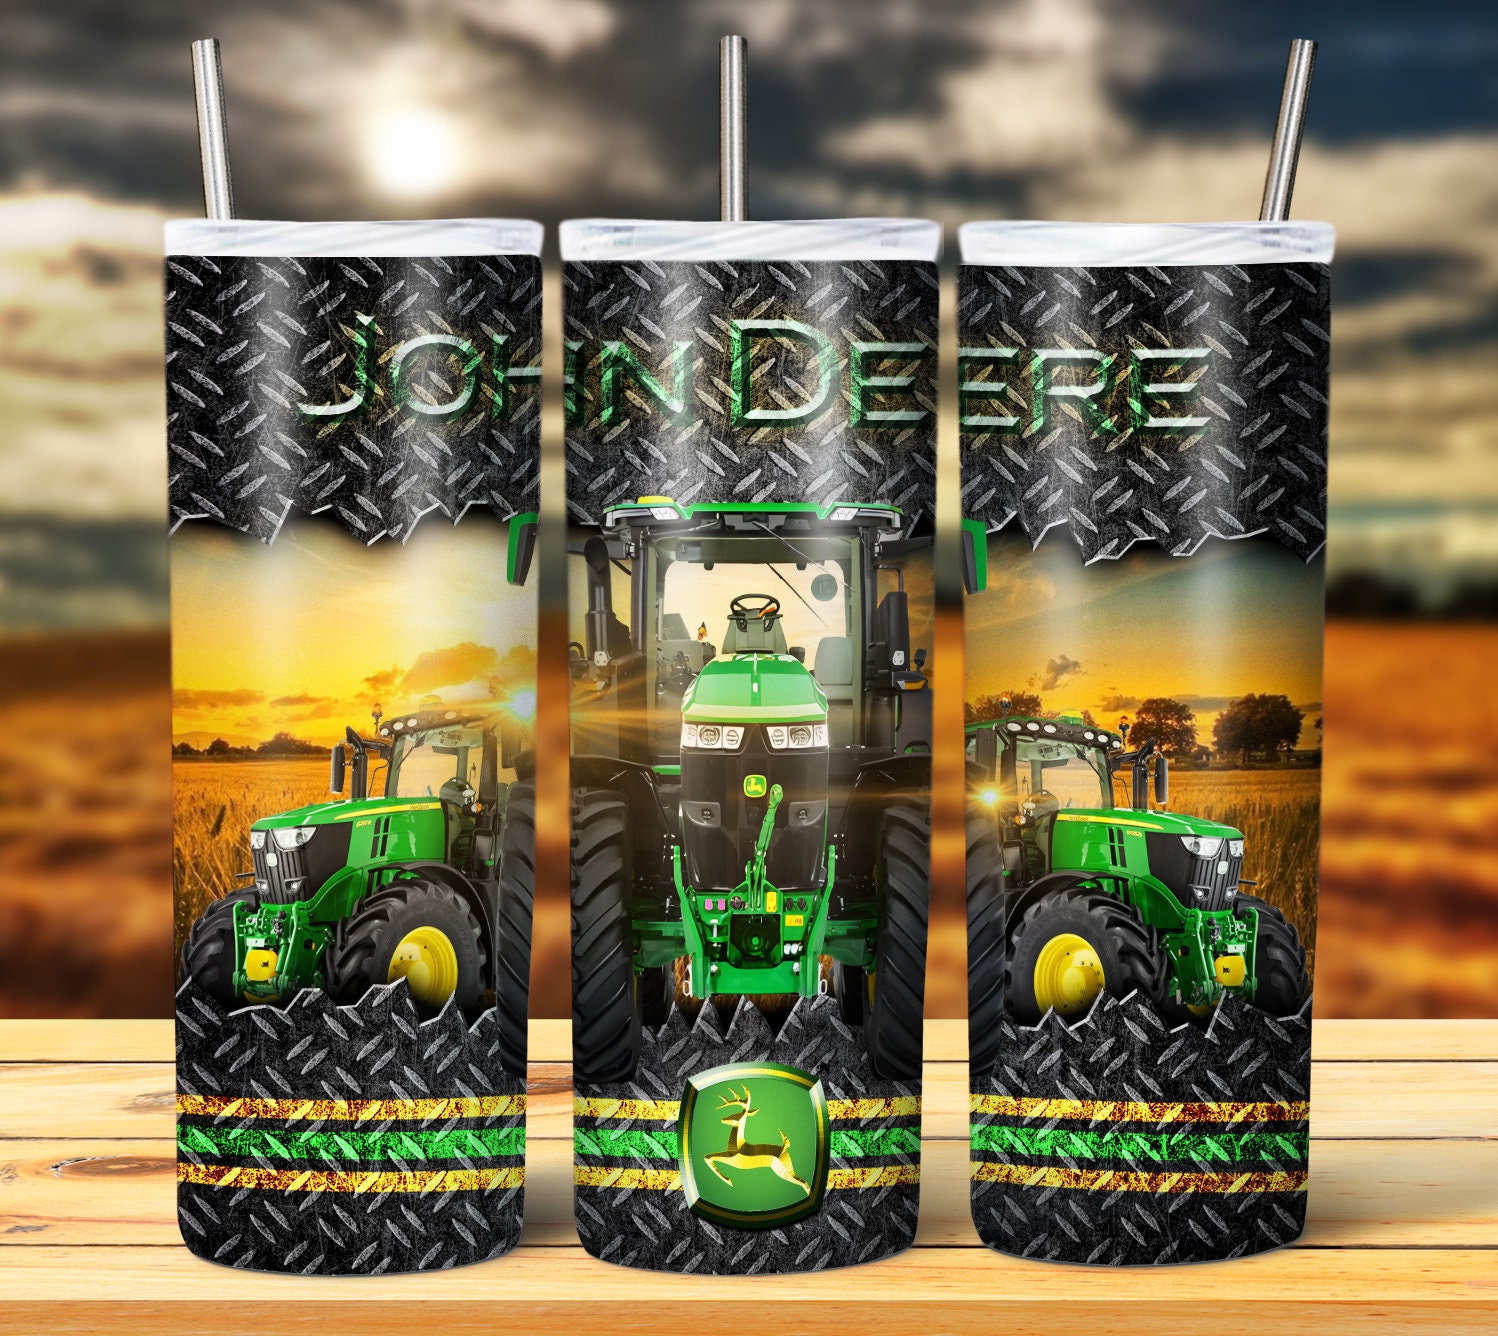 John Deere Tumbler - Tumblers - Absolute Sunshine - Handcrafted Goods In  Dover